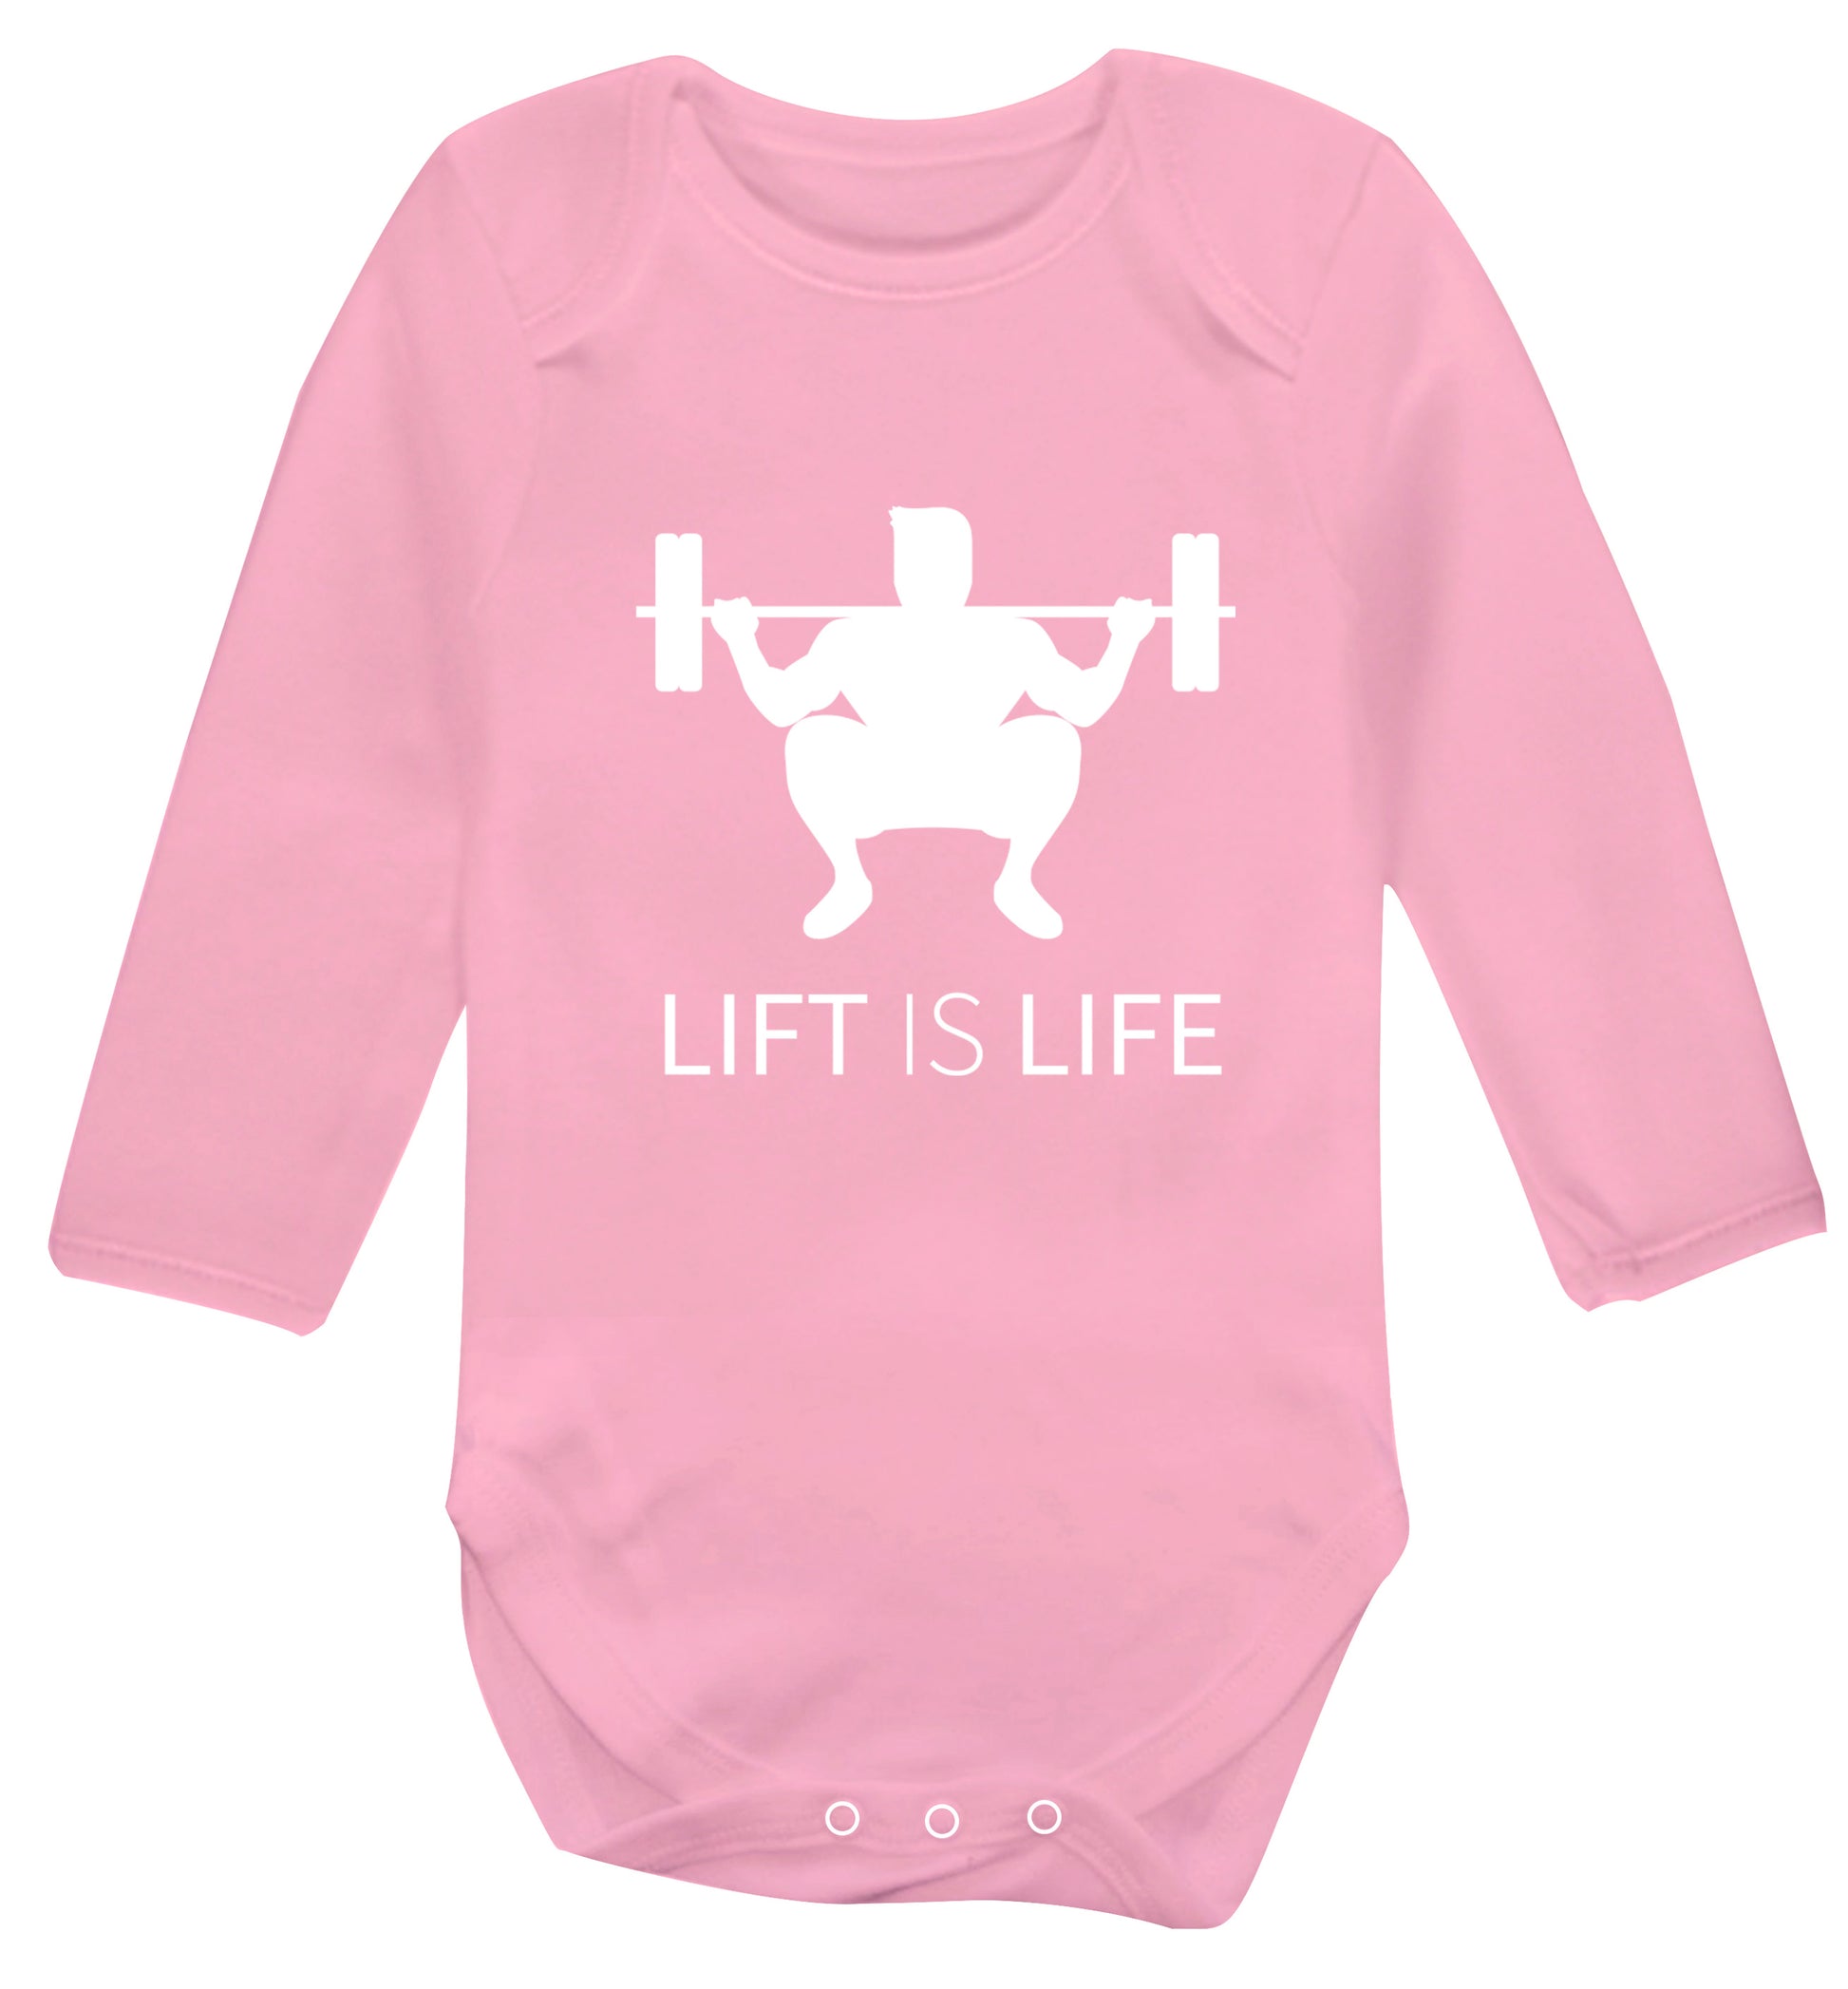 Lift is life Baby Vest long sleeved pale pink 6-12 months